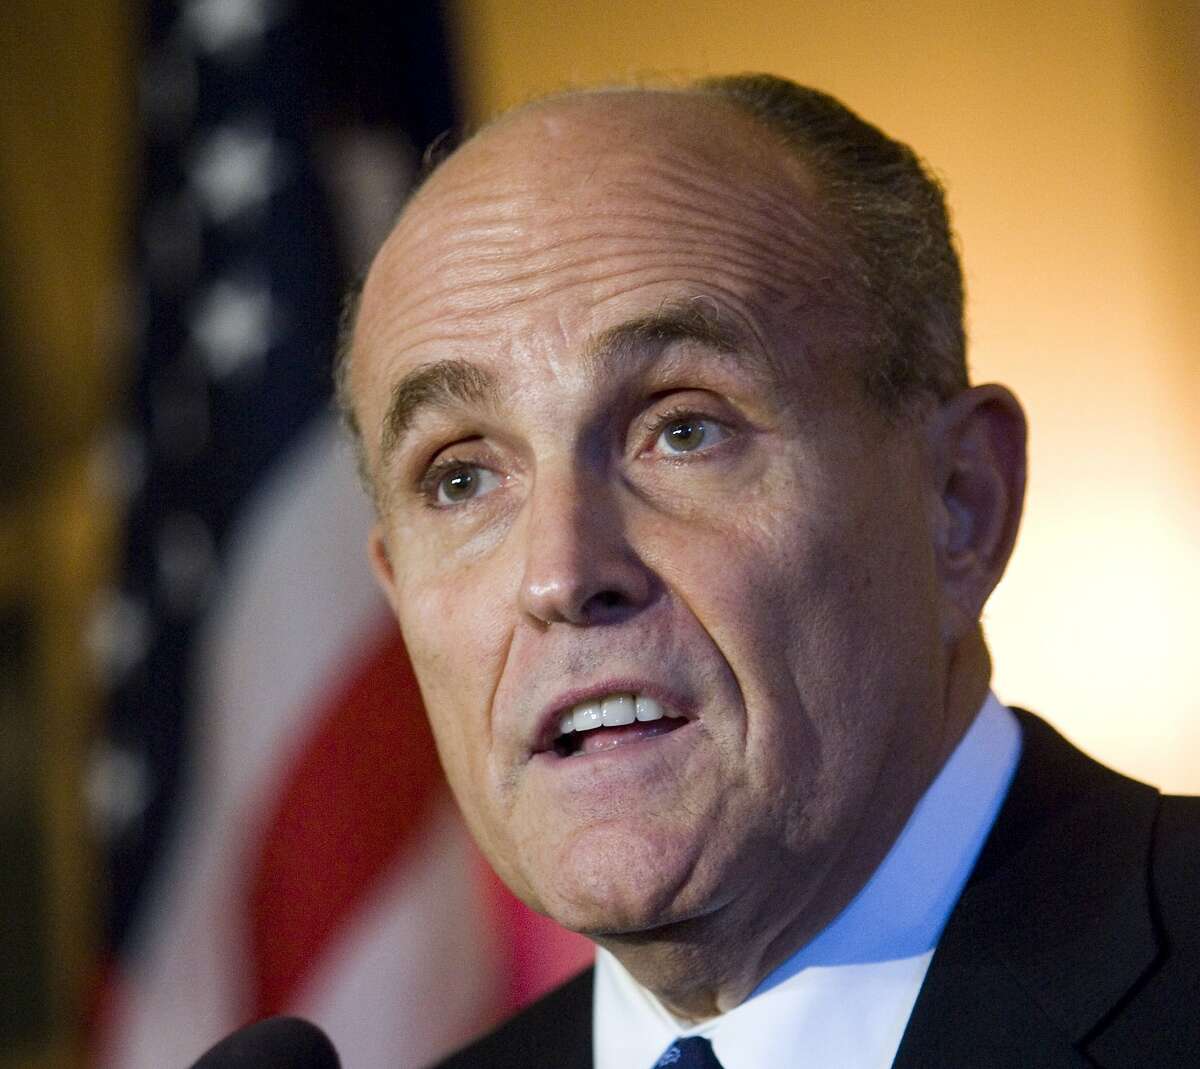 FILE - In this Oct. 18, 2007 file photo, Rudy Giuliani answers questions following a fundraiser in Milwaukee. Giuliani is giving Hillary Clinton credit for her work on behalf of victims of the Sept. 11, 2001, terrorist attacks. Giuliani was asked at a Republican Party briefing Thursday, July 28, 2016, in Philadelphia whether he took issue with the Democratic convention speakers who'd been praising Clinton. Giuliani said she was "enormously supportive and helpful." Clinton was a U.S. senator from New York at the time. 